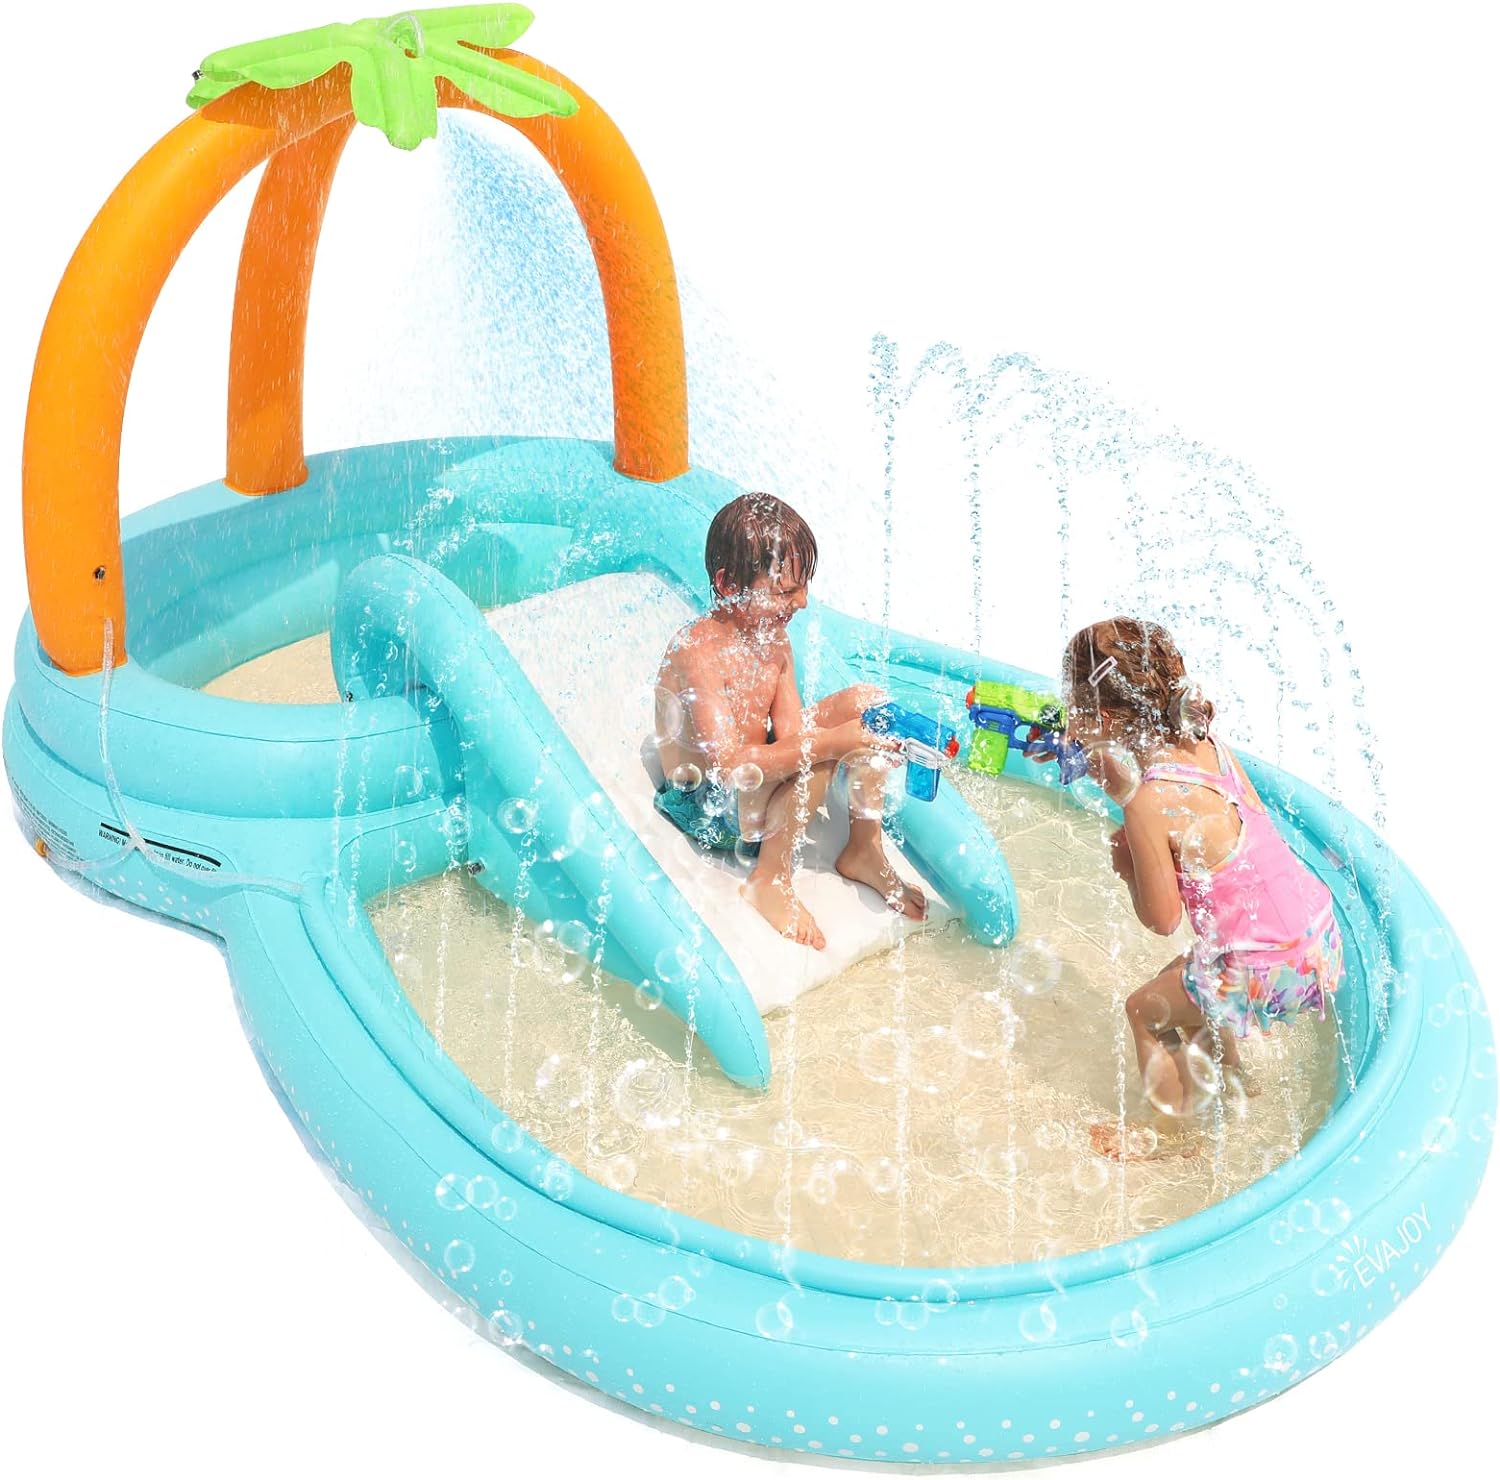 Kiddie Pool, Evajoy Inflatable Play Center Kids Pool with Slide, Water Sprayers Thickened Wear-Resistant Full-Sized Swimming Pool for Kids Toddler Children, Garden Backyard & Indoor Use 110x71x53